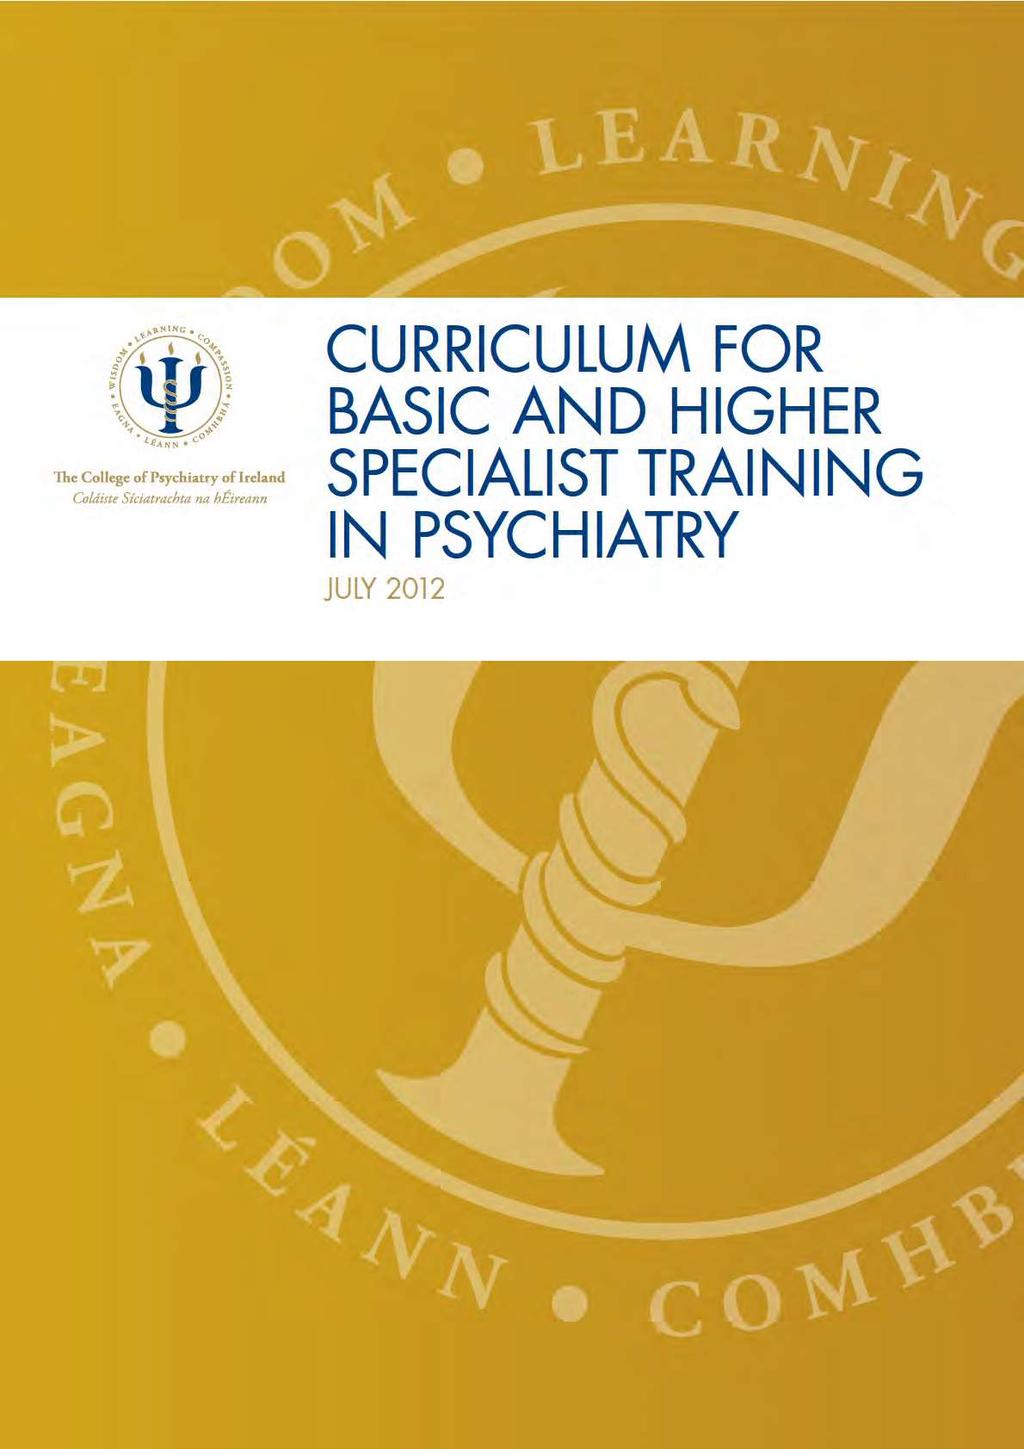 CURRICULUM FOR BASIC AND HIGHER SPECIALIST TRAINING IN PSYCHIATRY July 2012 Revision 6